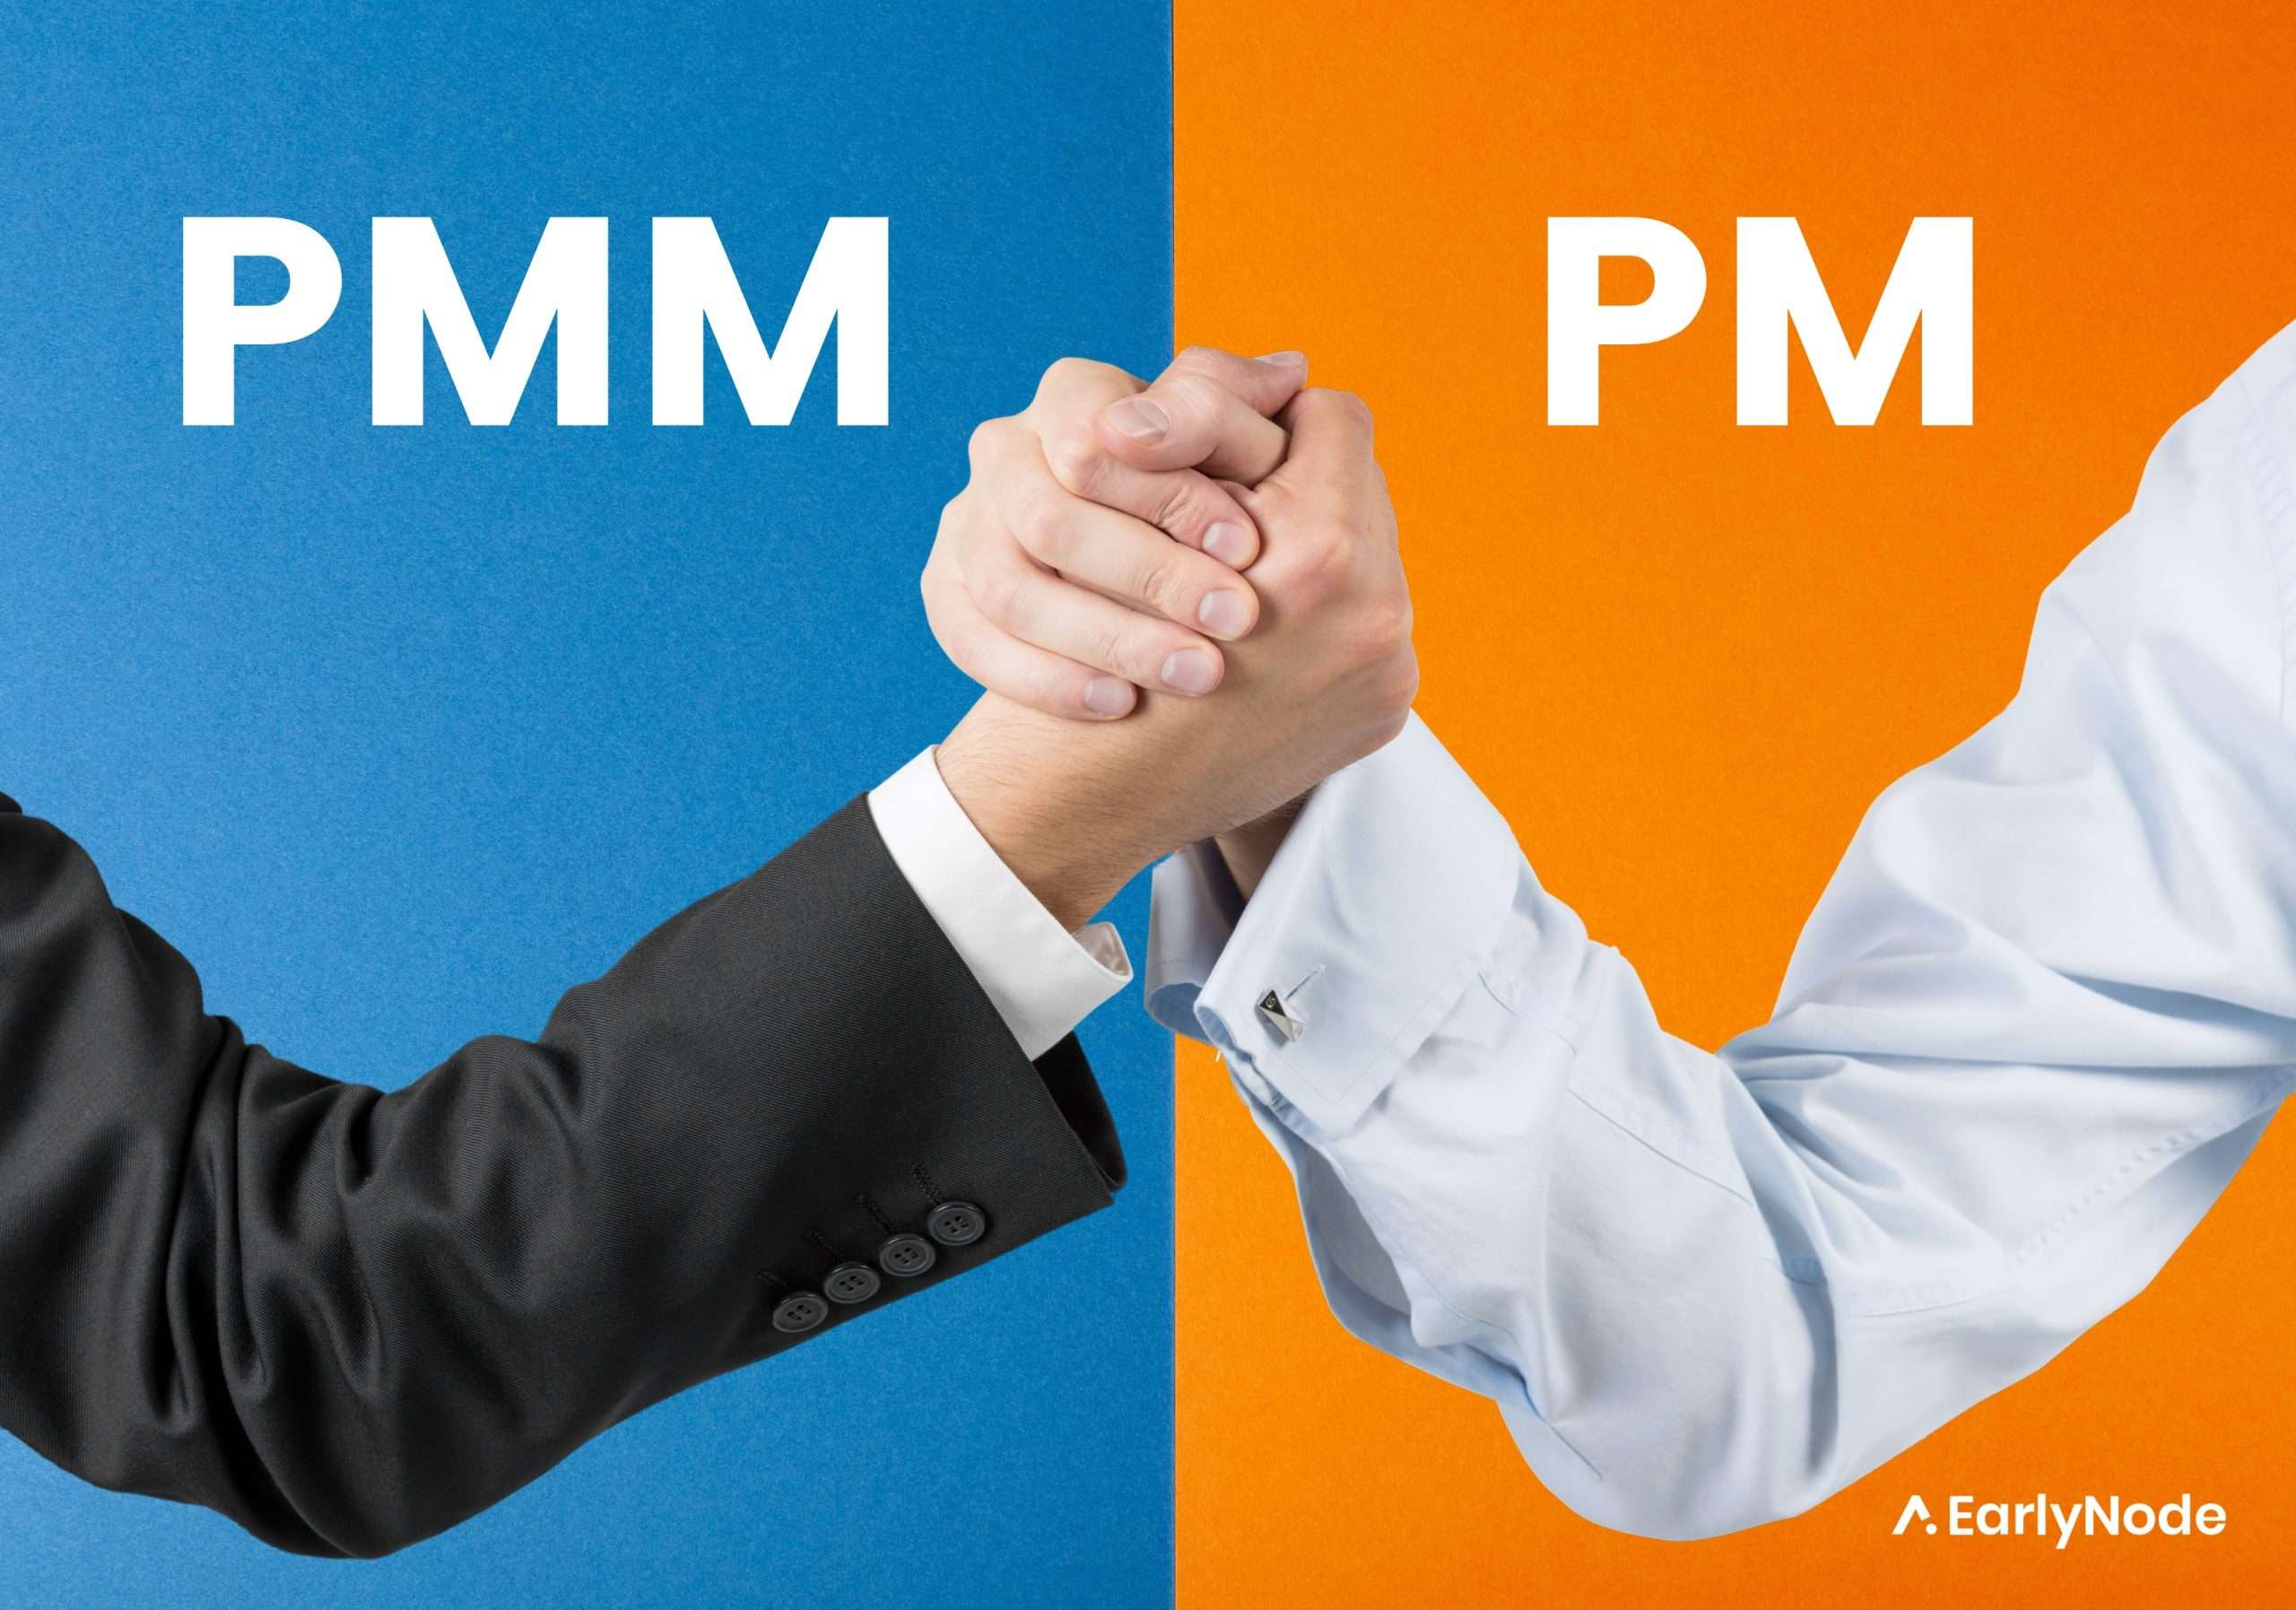 How do PMMs and PMs effectively work together in SaaS?